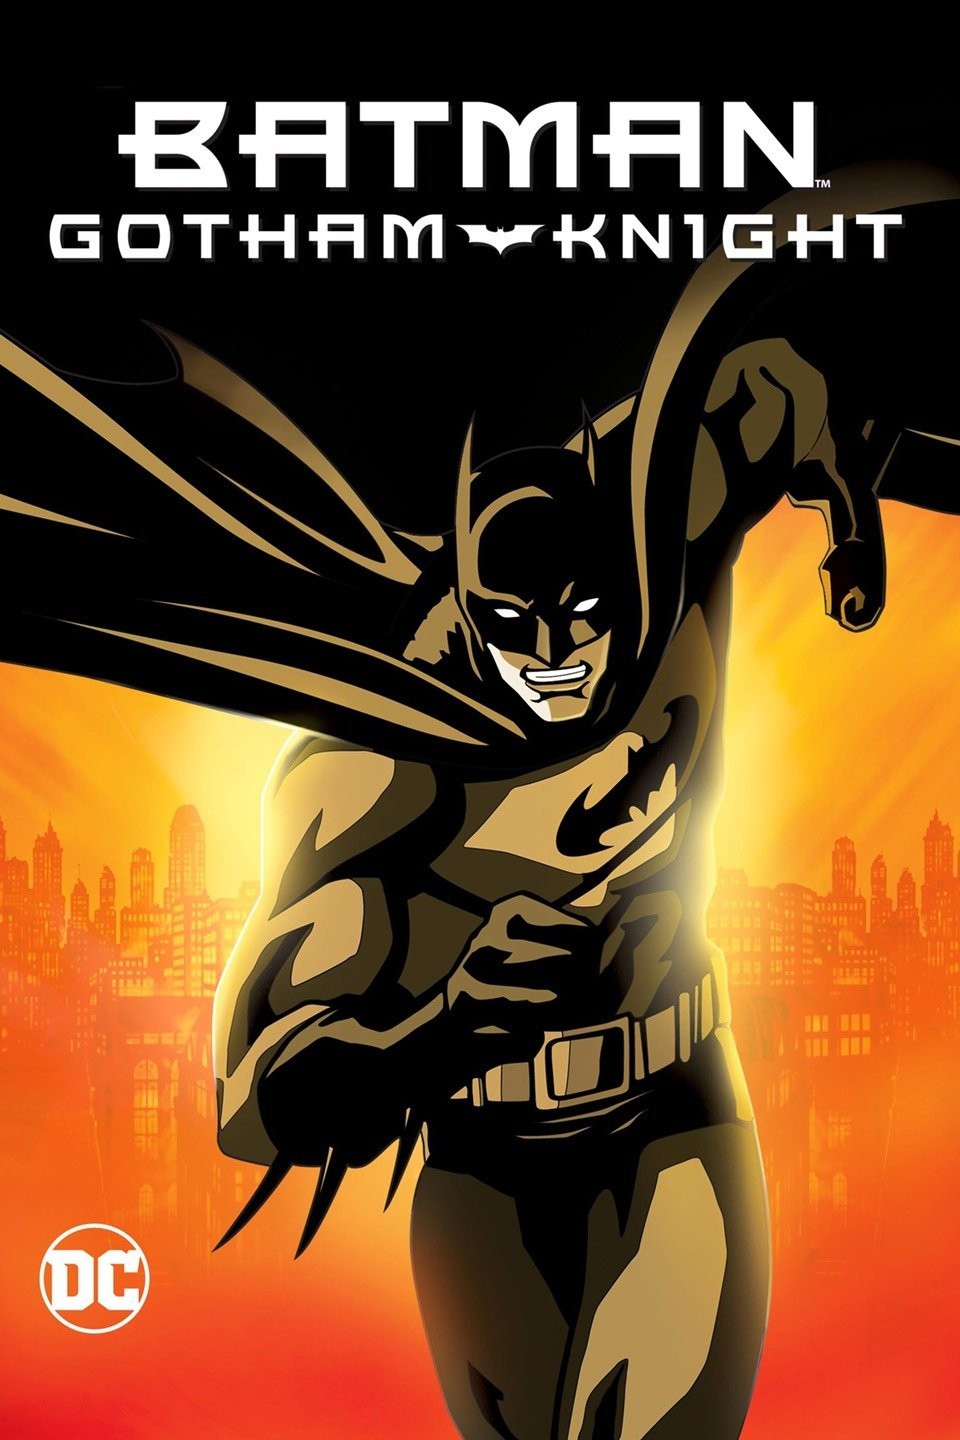 Kevin Conroy - Rotten Tomatoes